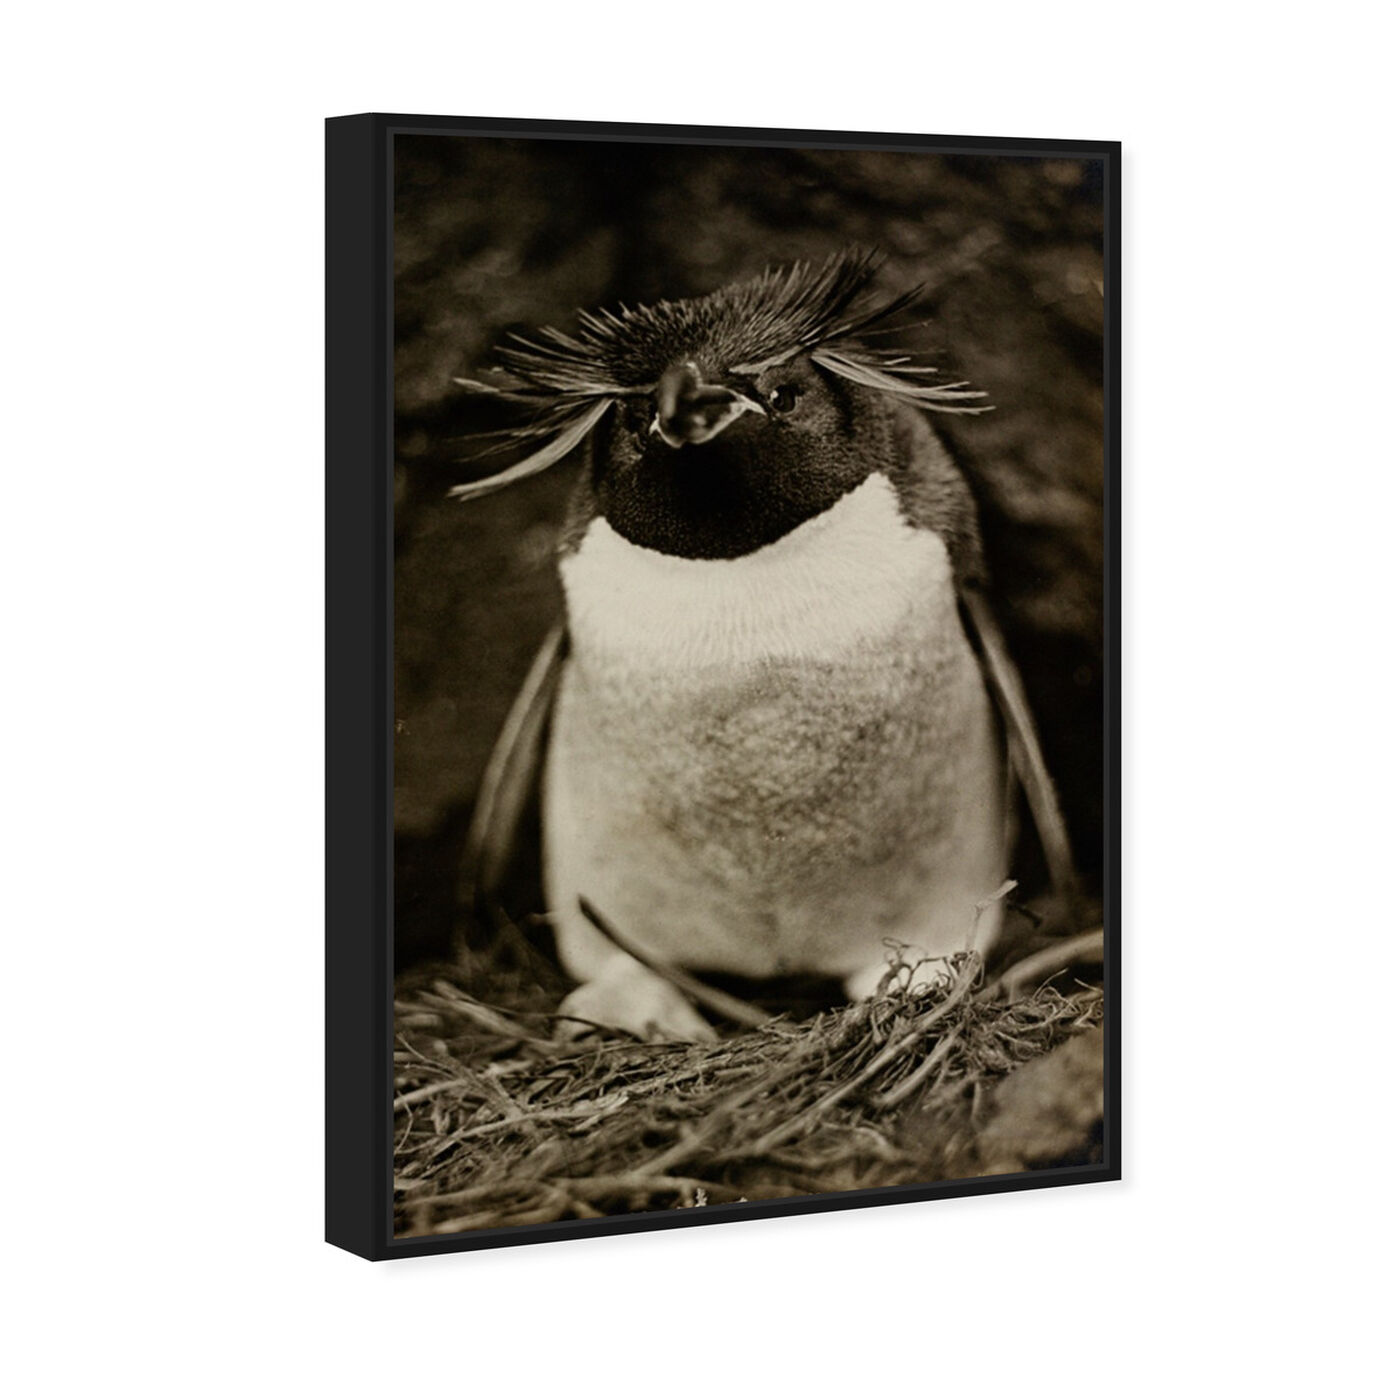 Angled view of Sclater Penguin - The Art Cabinet featuring animals and birds art.